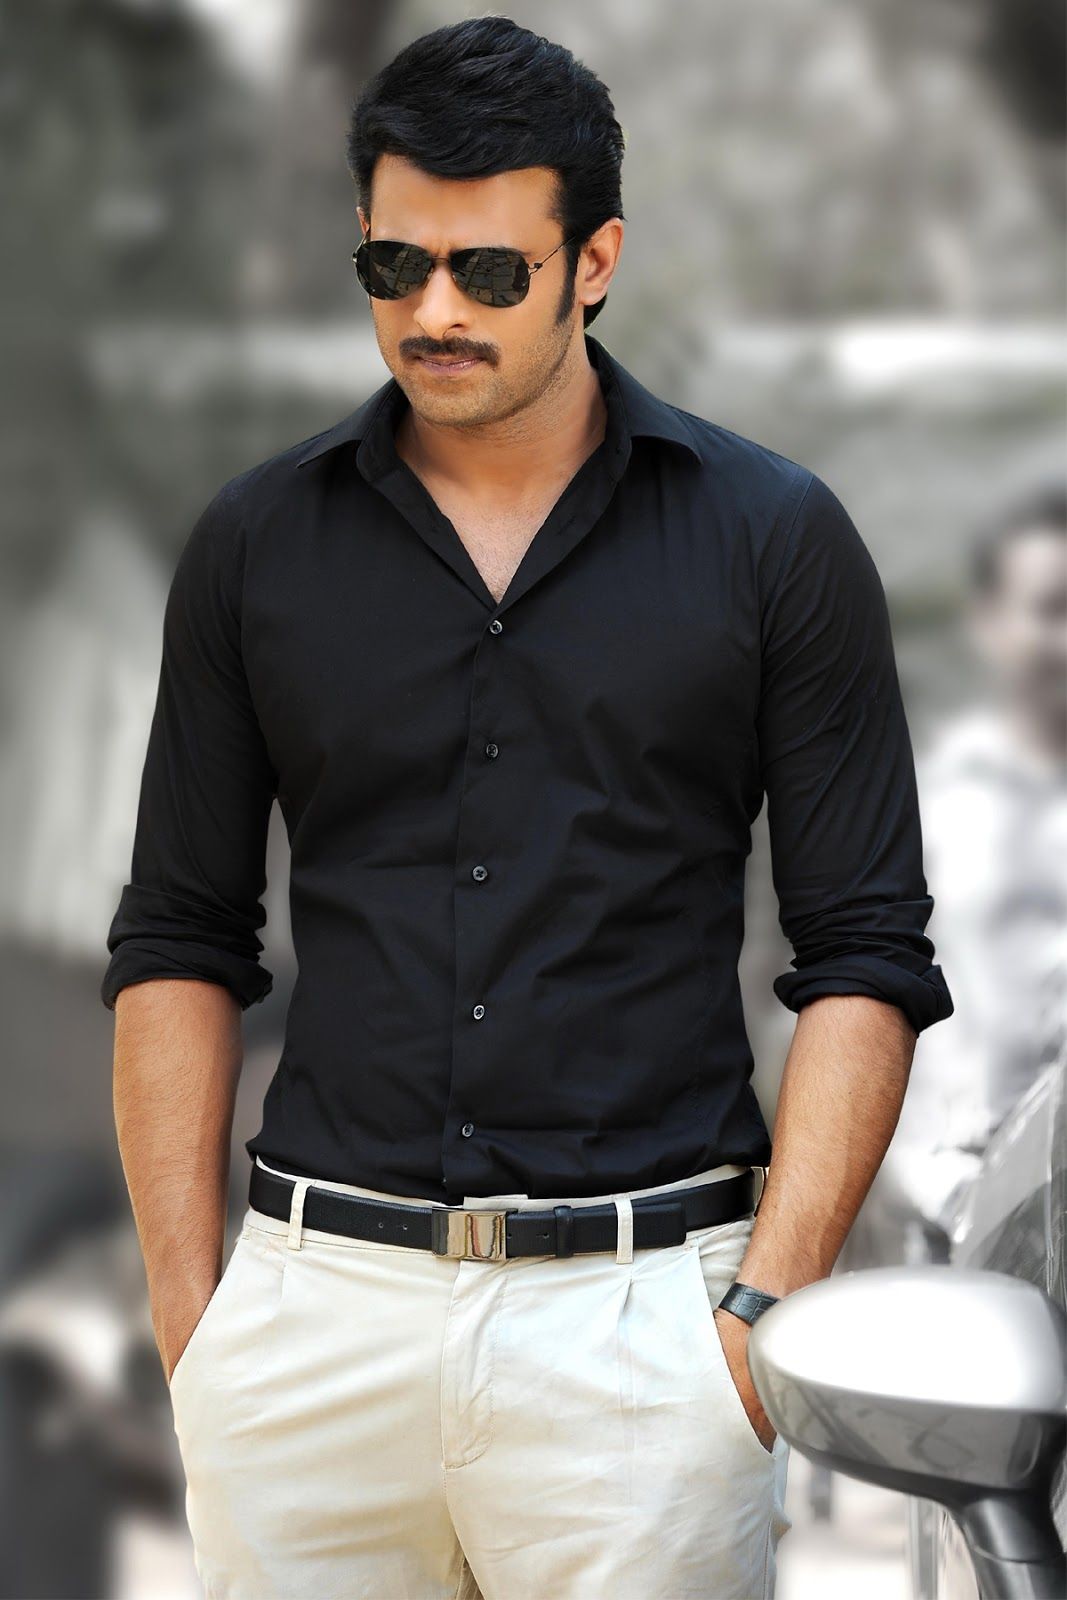 Prabhas Latest HD Wallpapers HD Wallpapers High Definition